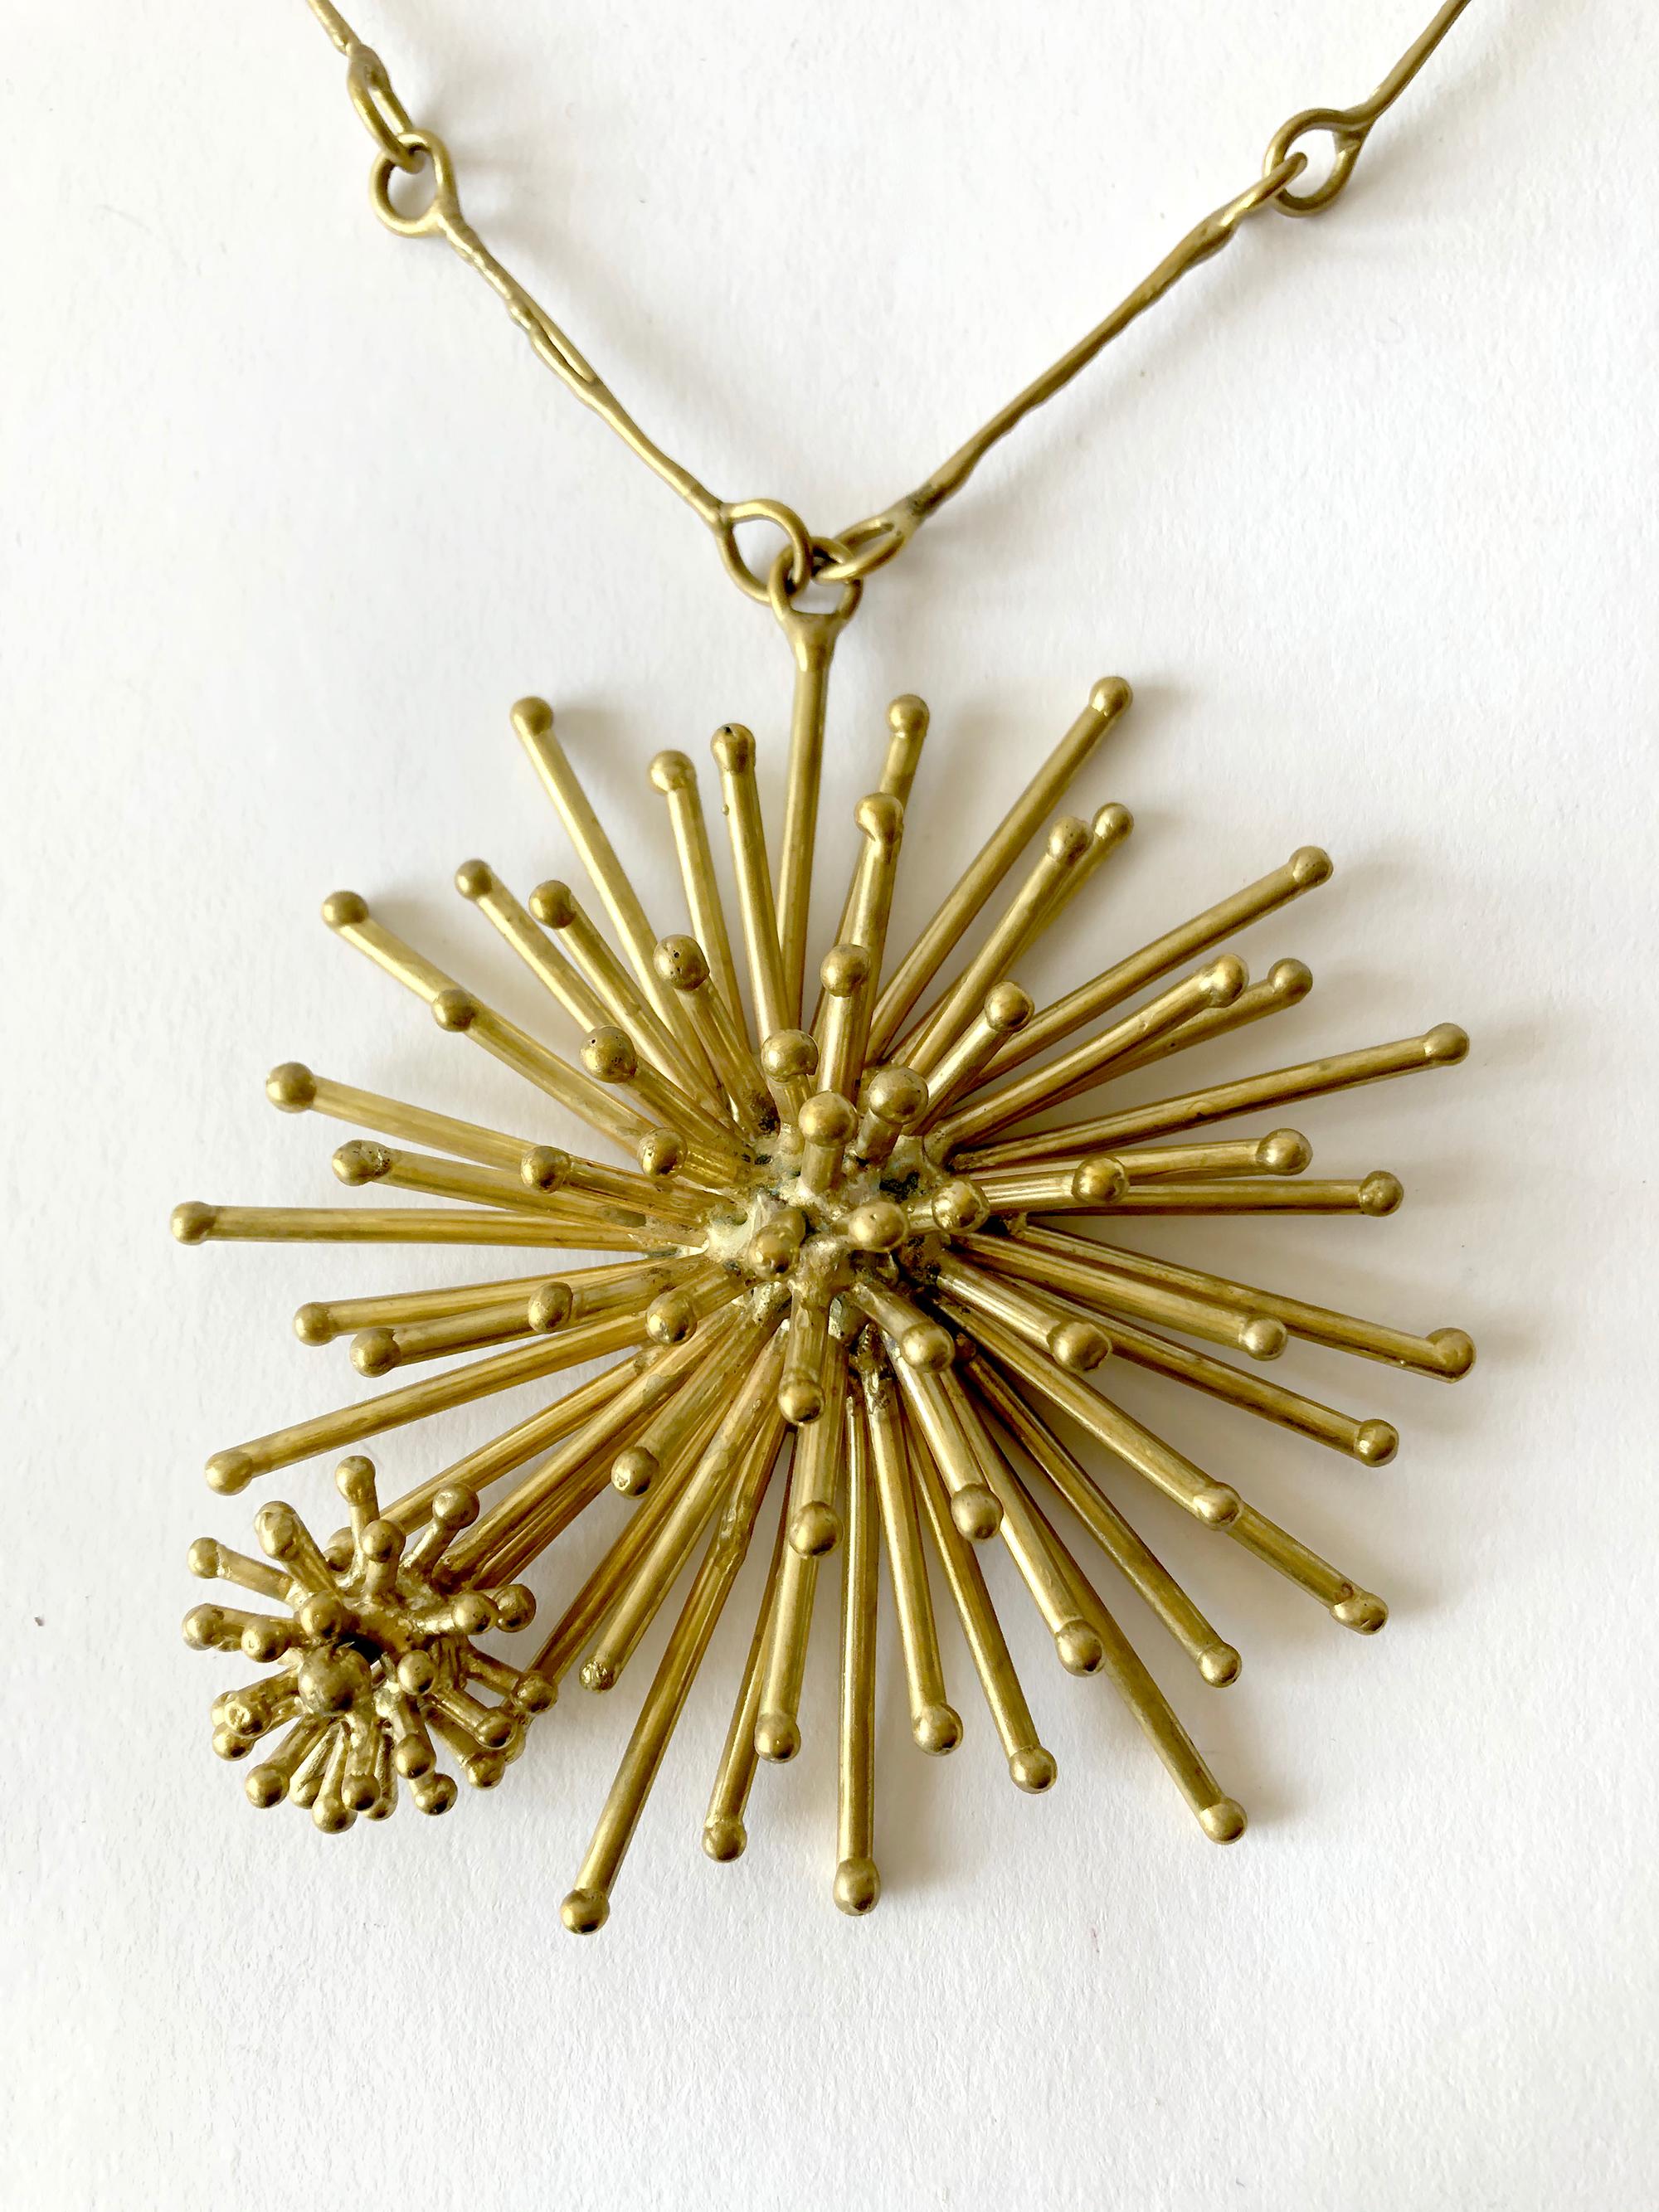 Gold plated bronze starburst necklace created by Pal Kepenyes of Acapulco, Mexico.  Pendant measures 4.75